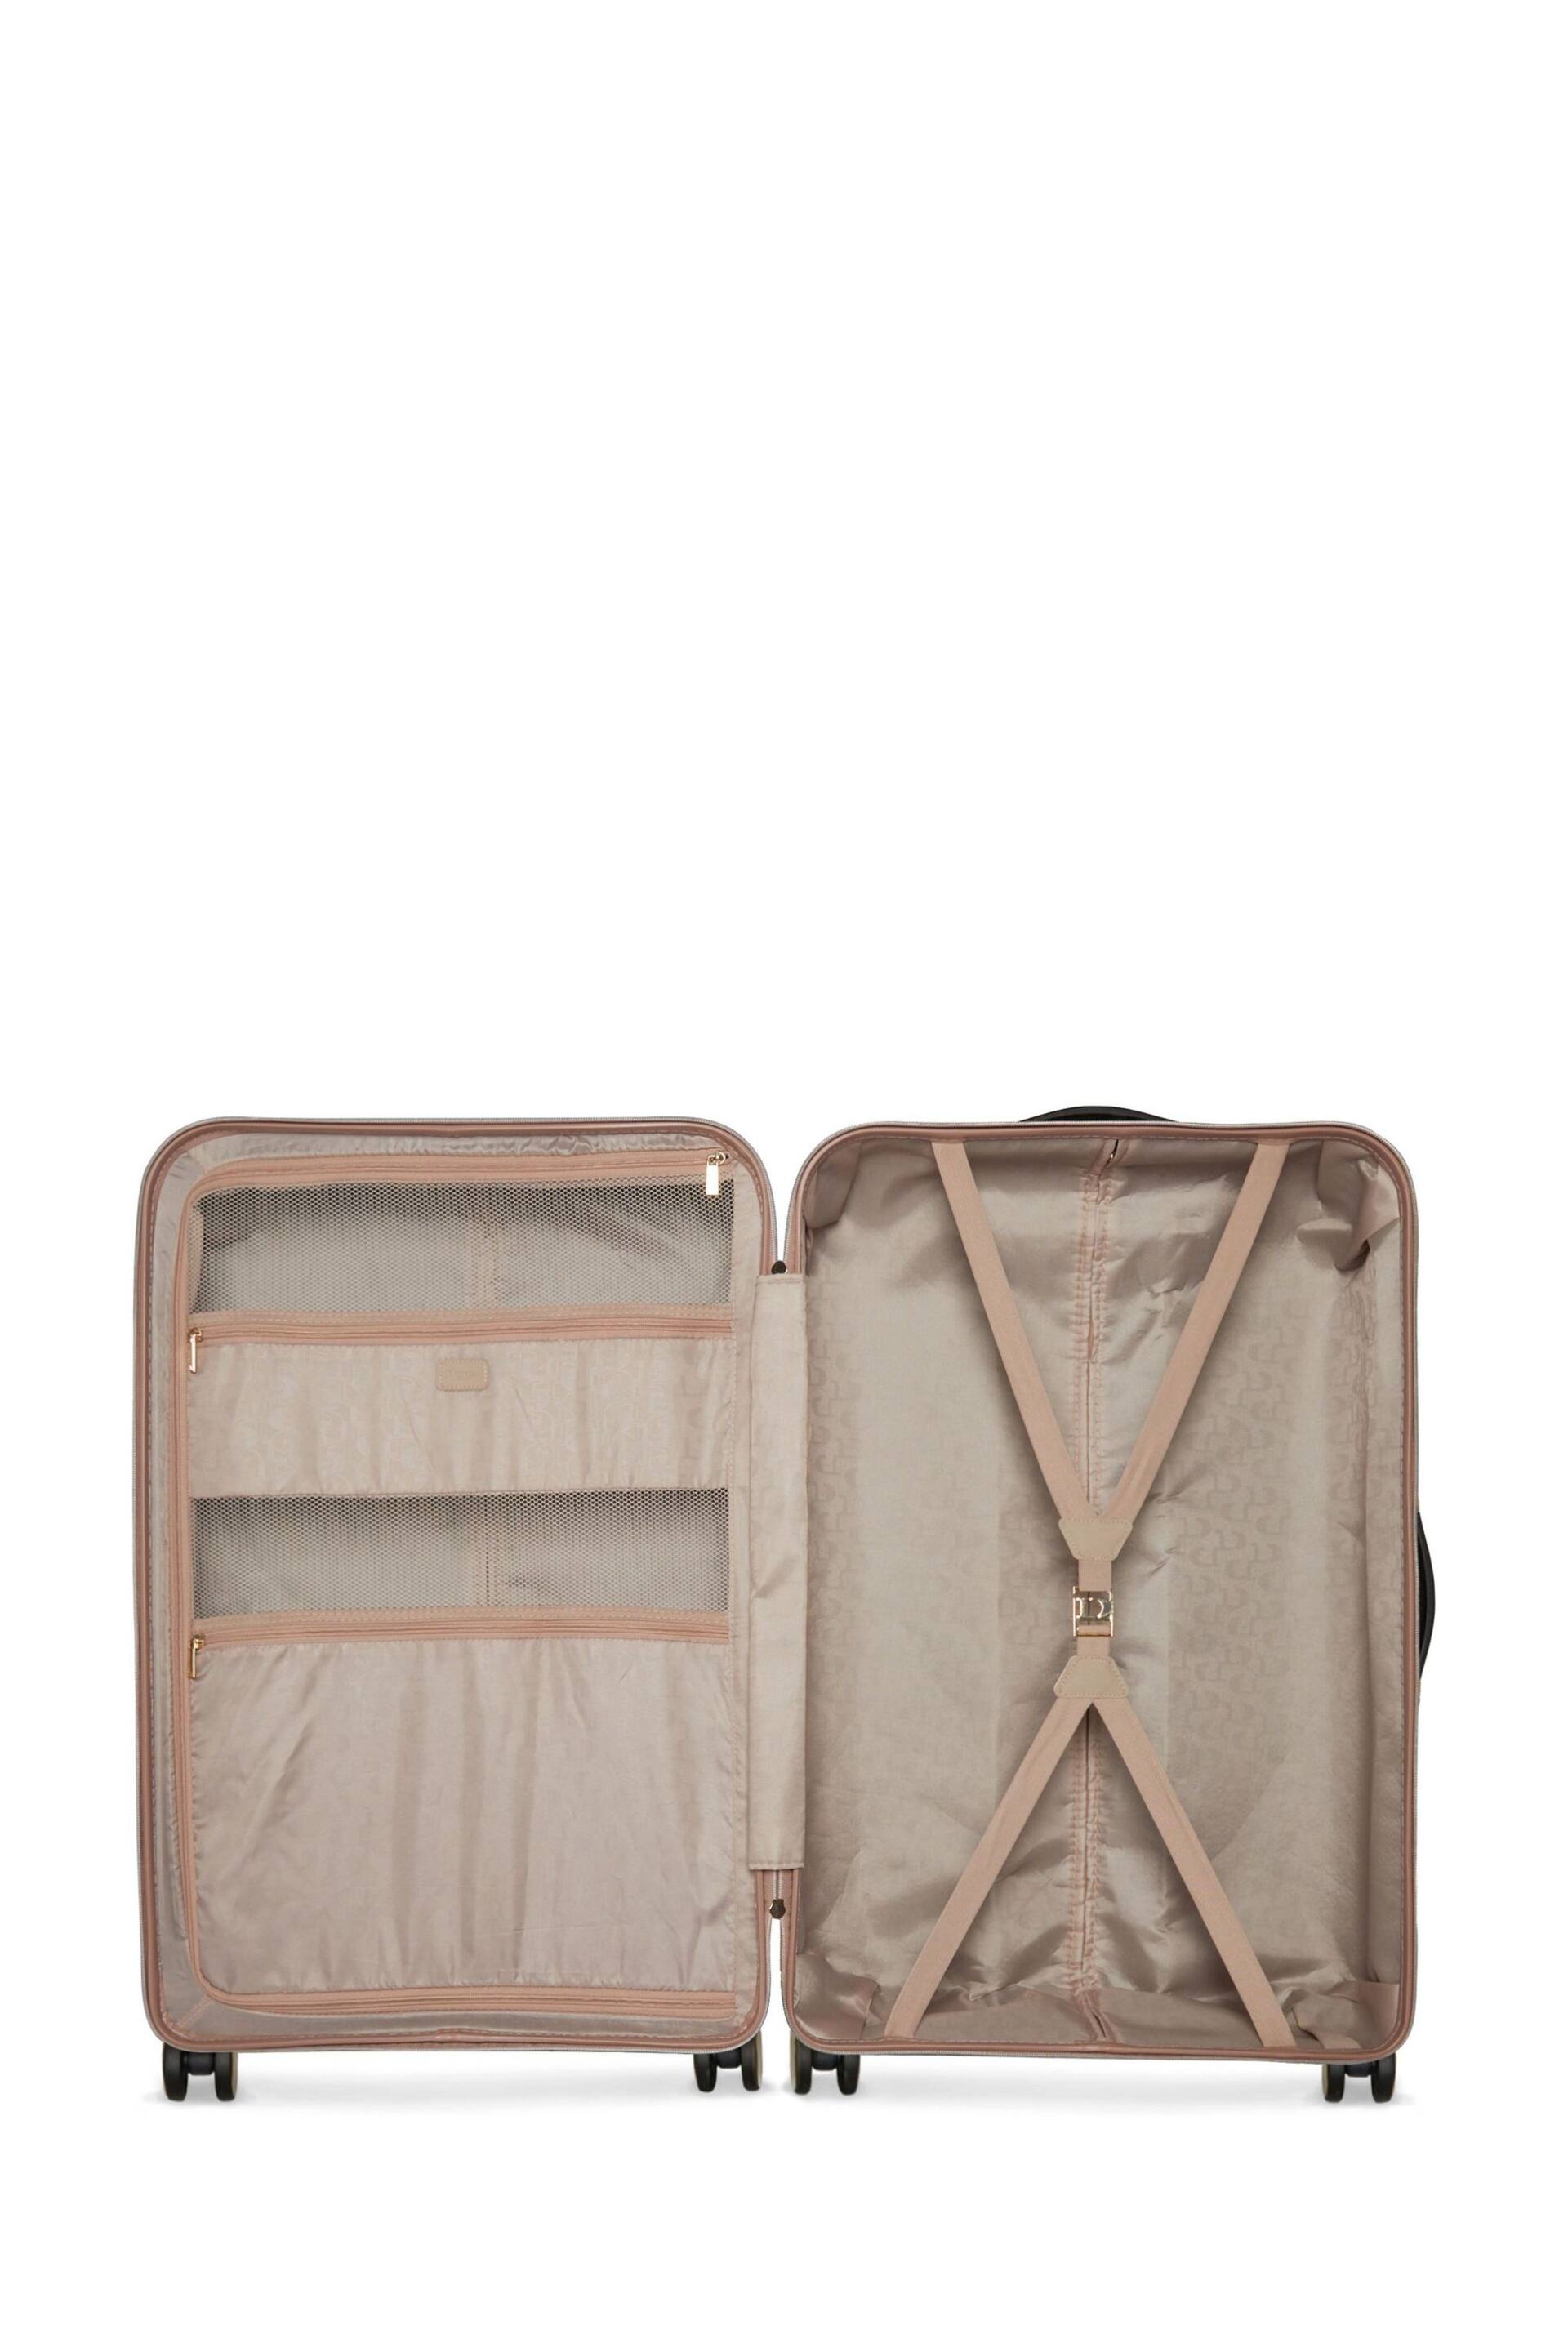 Dune London Pink Large Orchester 77cm Suitcase - Image 4 of 5